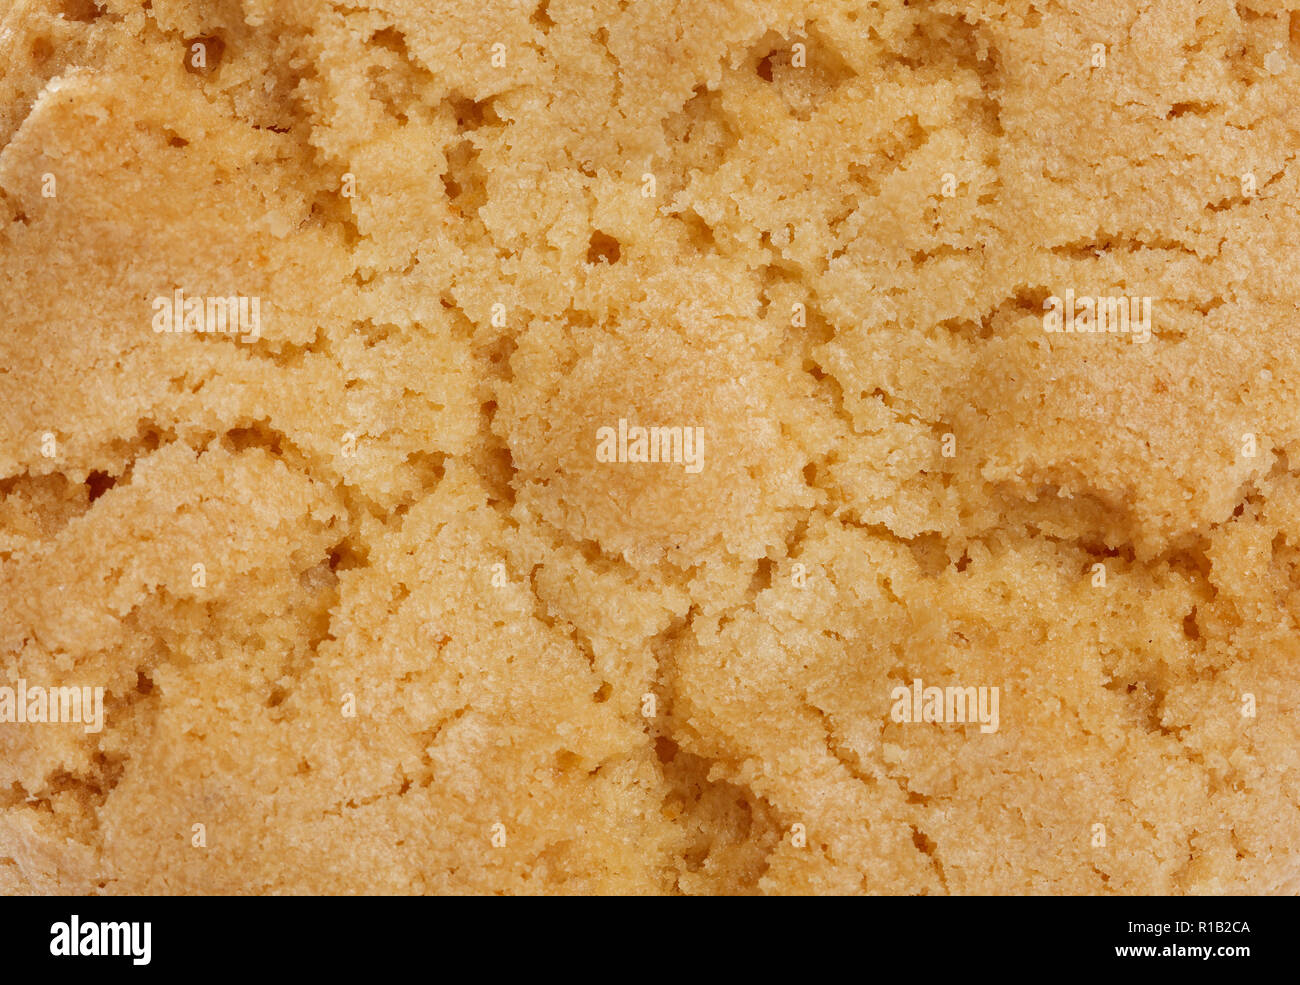 Yellow crunchy cookie background texture, close up. Stock Photo